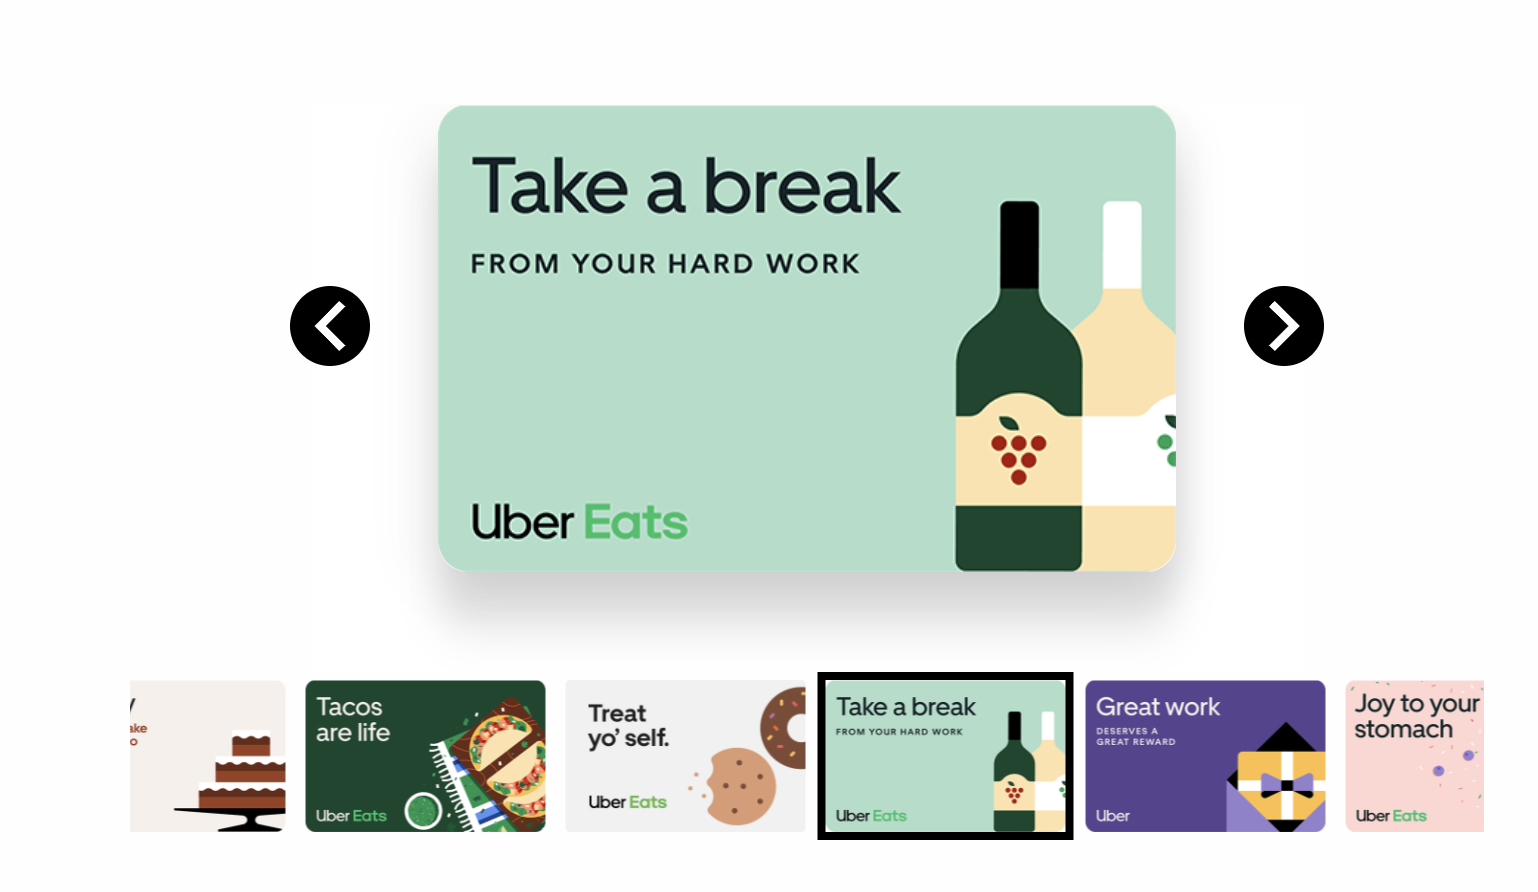 Uber Eats gifting experience